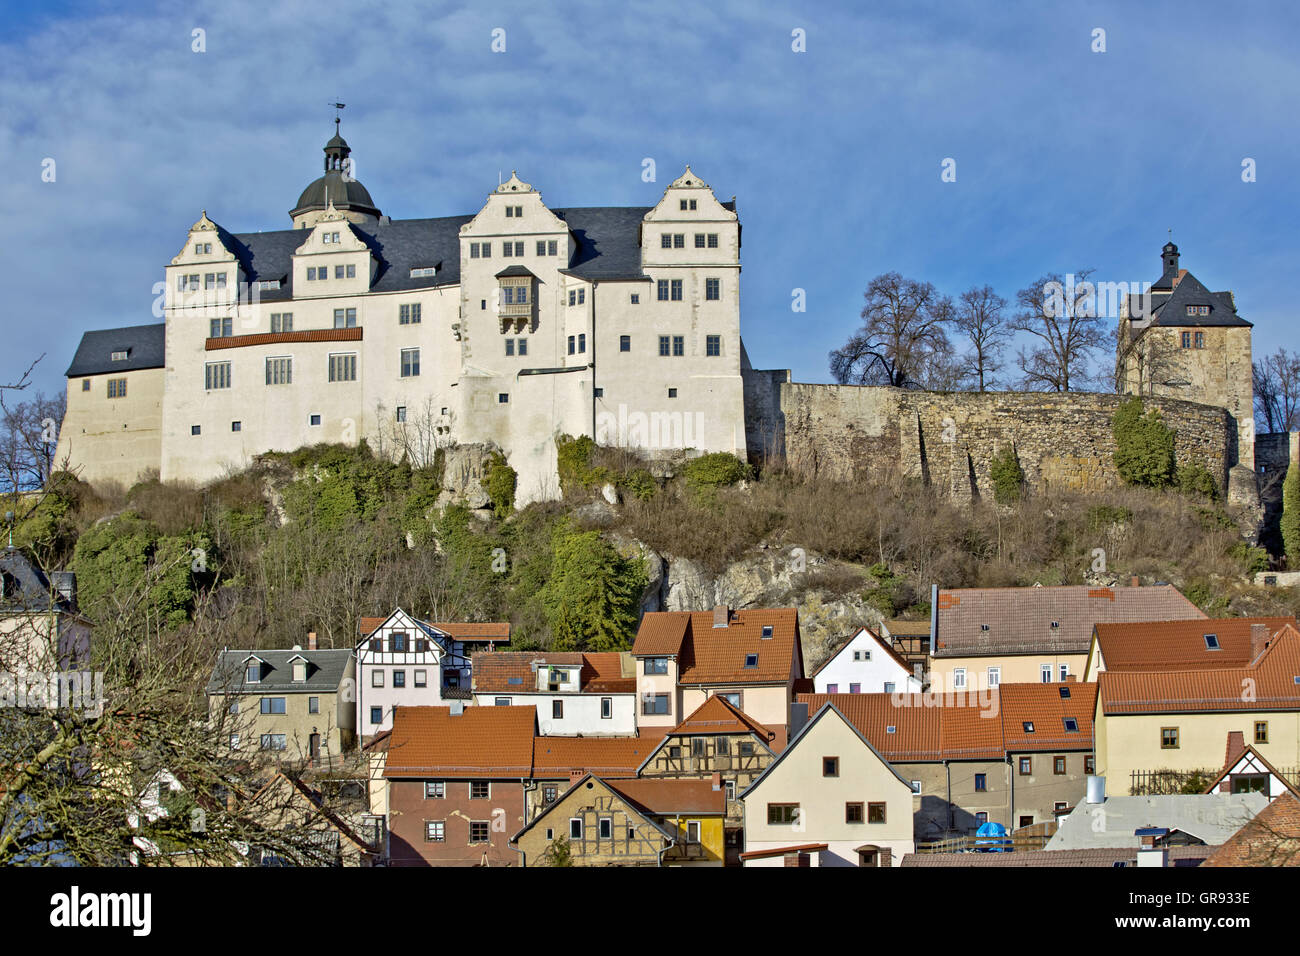 Looking For Ranis And Parts Of The Old Town Houses In Sunshine And Clouds, Thuringia, Germany, Europe Stock Photo